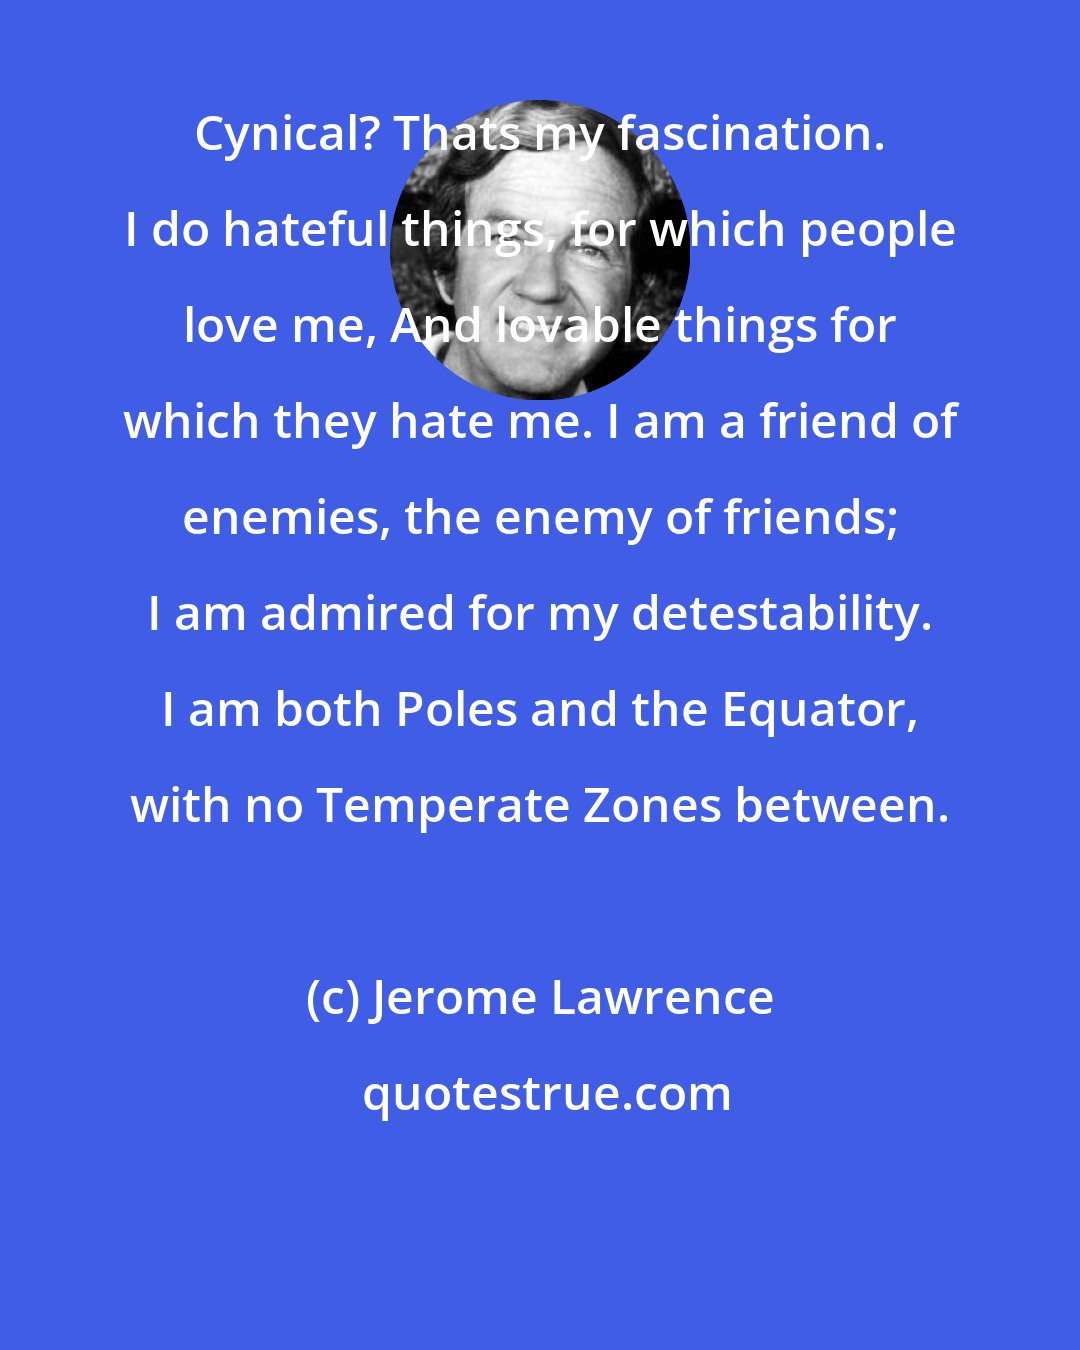 Jerome Lawrence: Cynical? Thats my fascination. I do hateful things, for which people love me, And lovable things for which they hate me. I am a friend of enemies, the enemy of friends; I am admired for my detestability. I am both Poles and the Equator, with no Temperate Zones between.